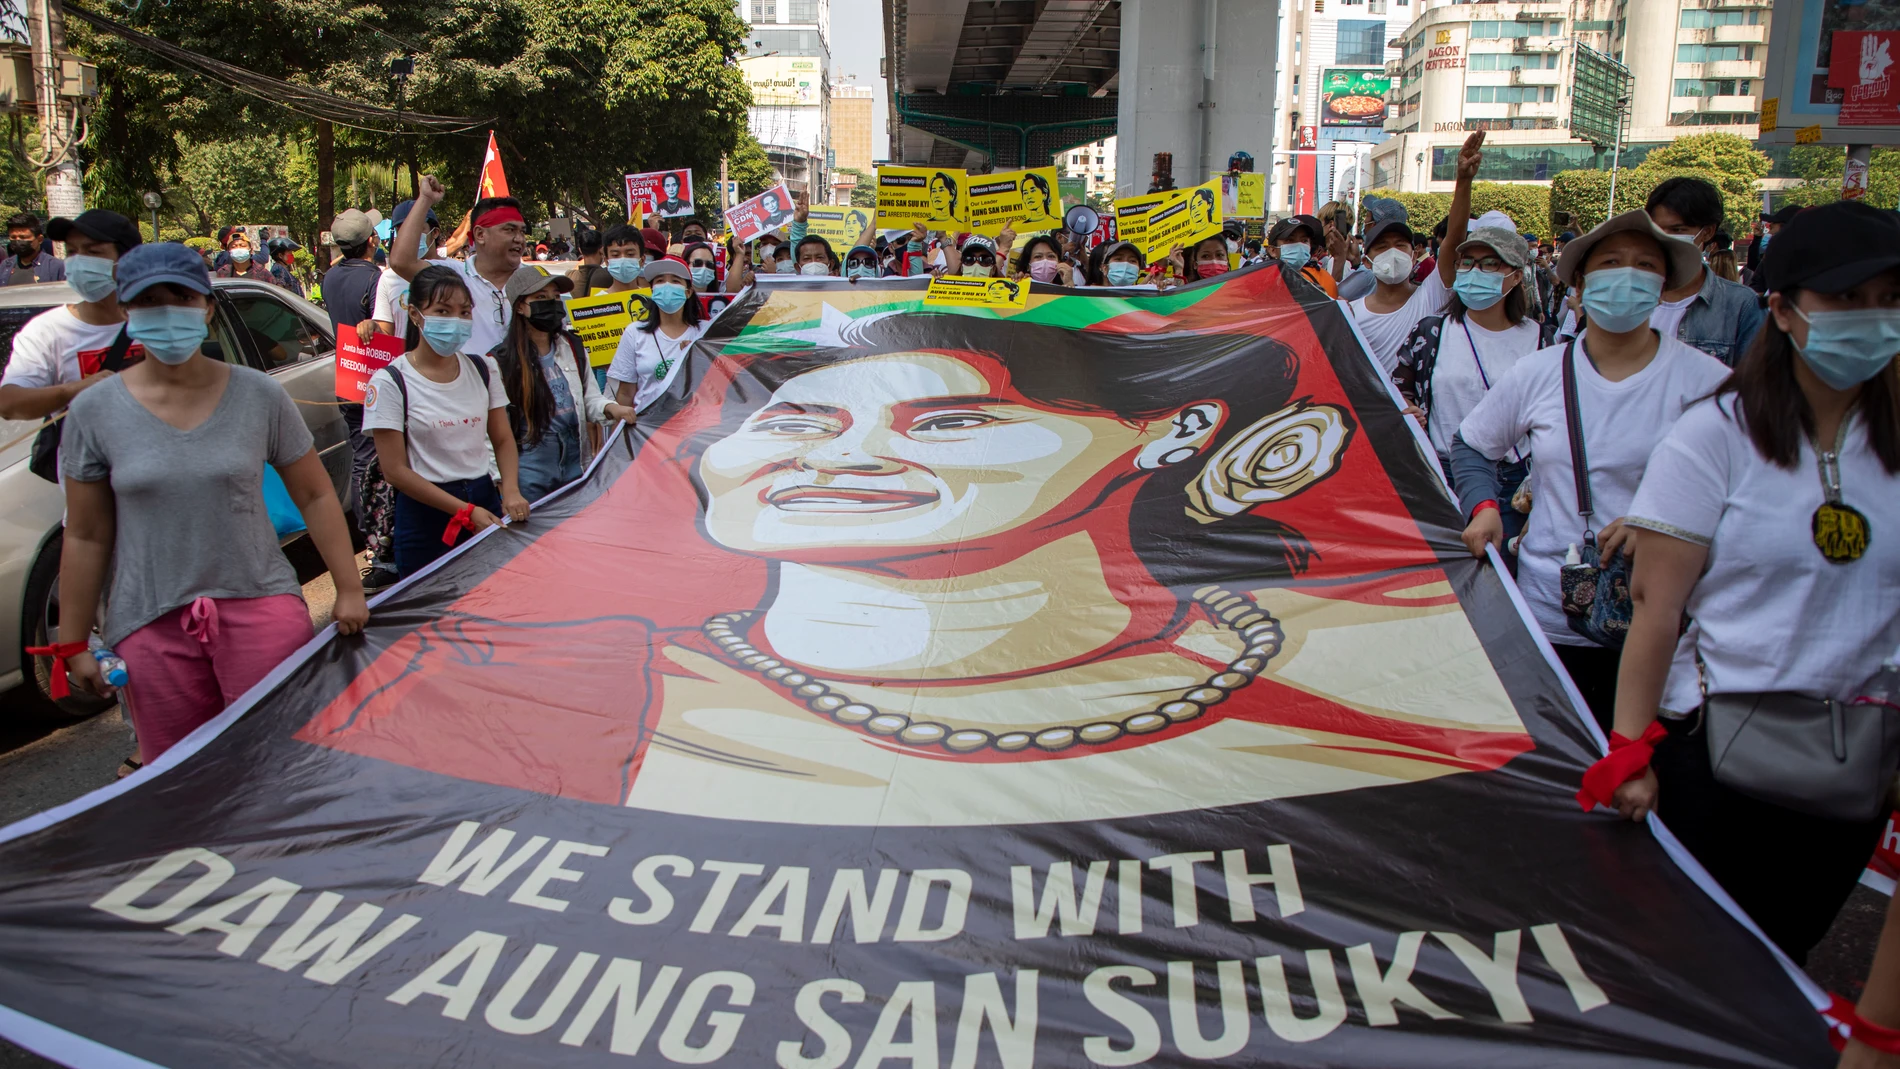 20 February 2021, Myanmar, Yangon: Protesters hold a large banner of Aung San Suu Kyi during a demonstration against the military coup and the detention of civilian leaders in Myanmar. Photo: Thuya Zaw/ZUMA Wire/dpa20/02/2021 ONLY FOR USE IN SPAIN